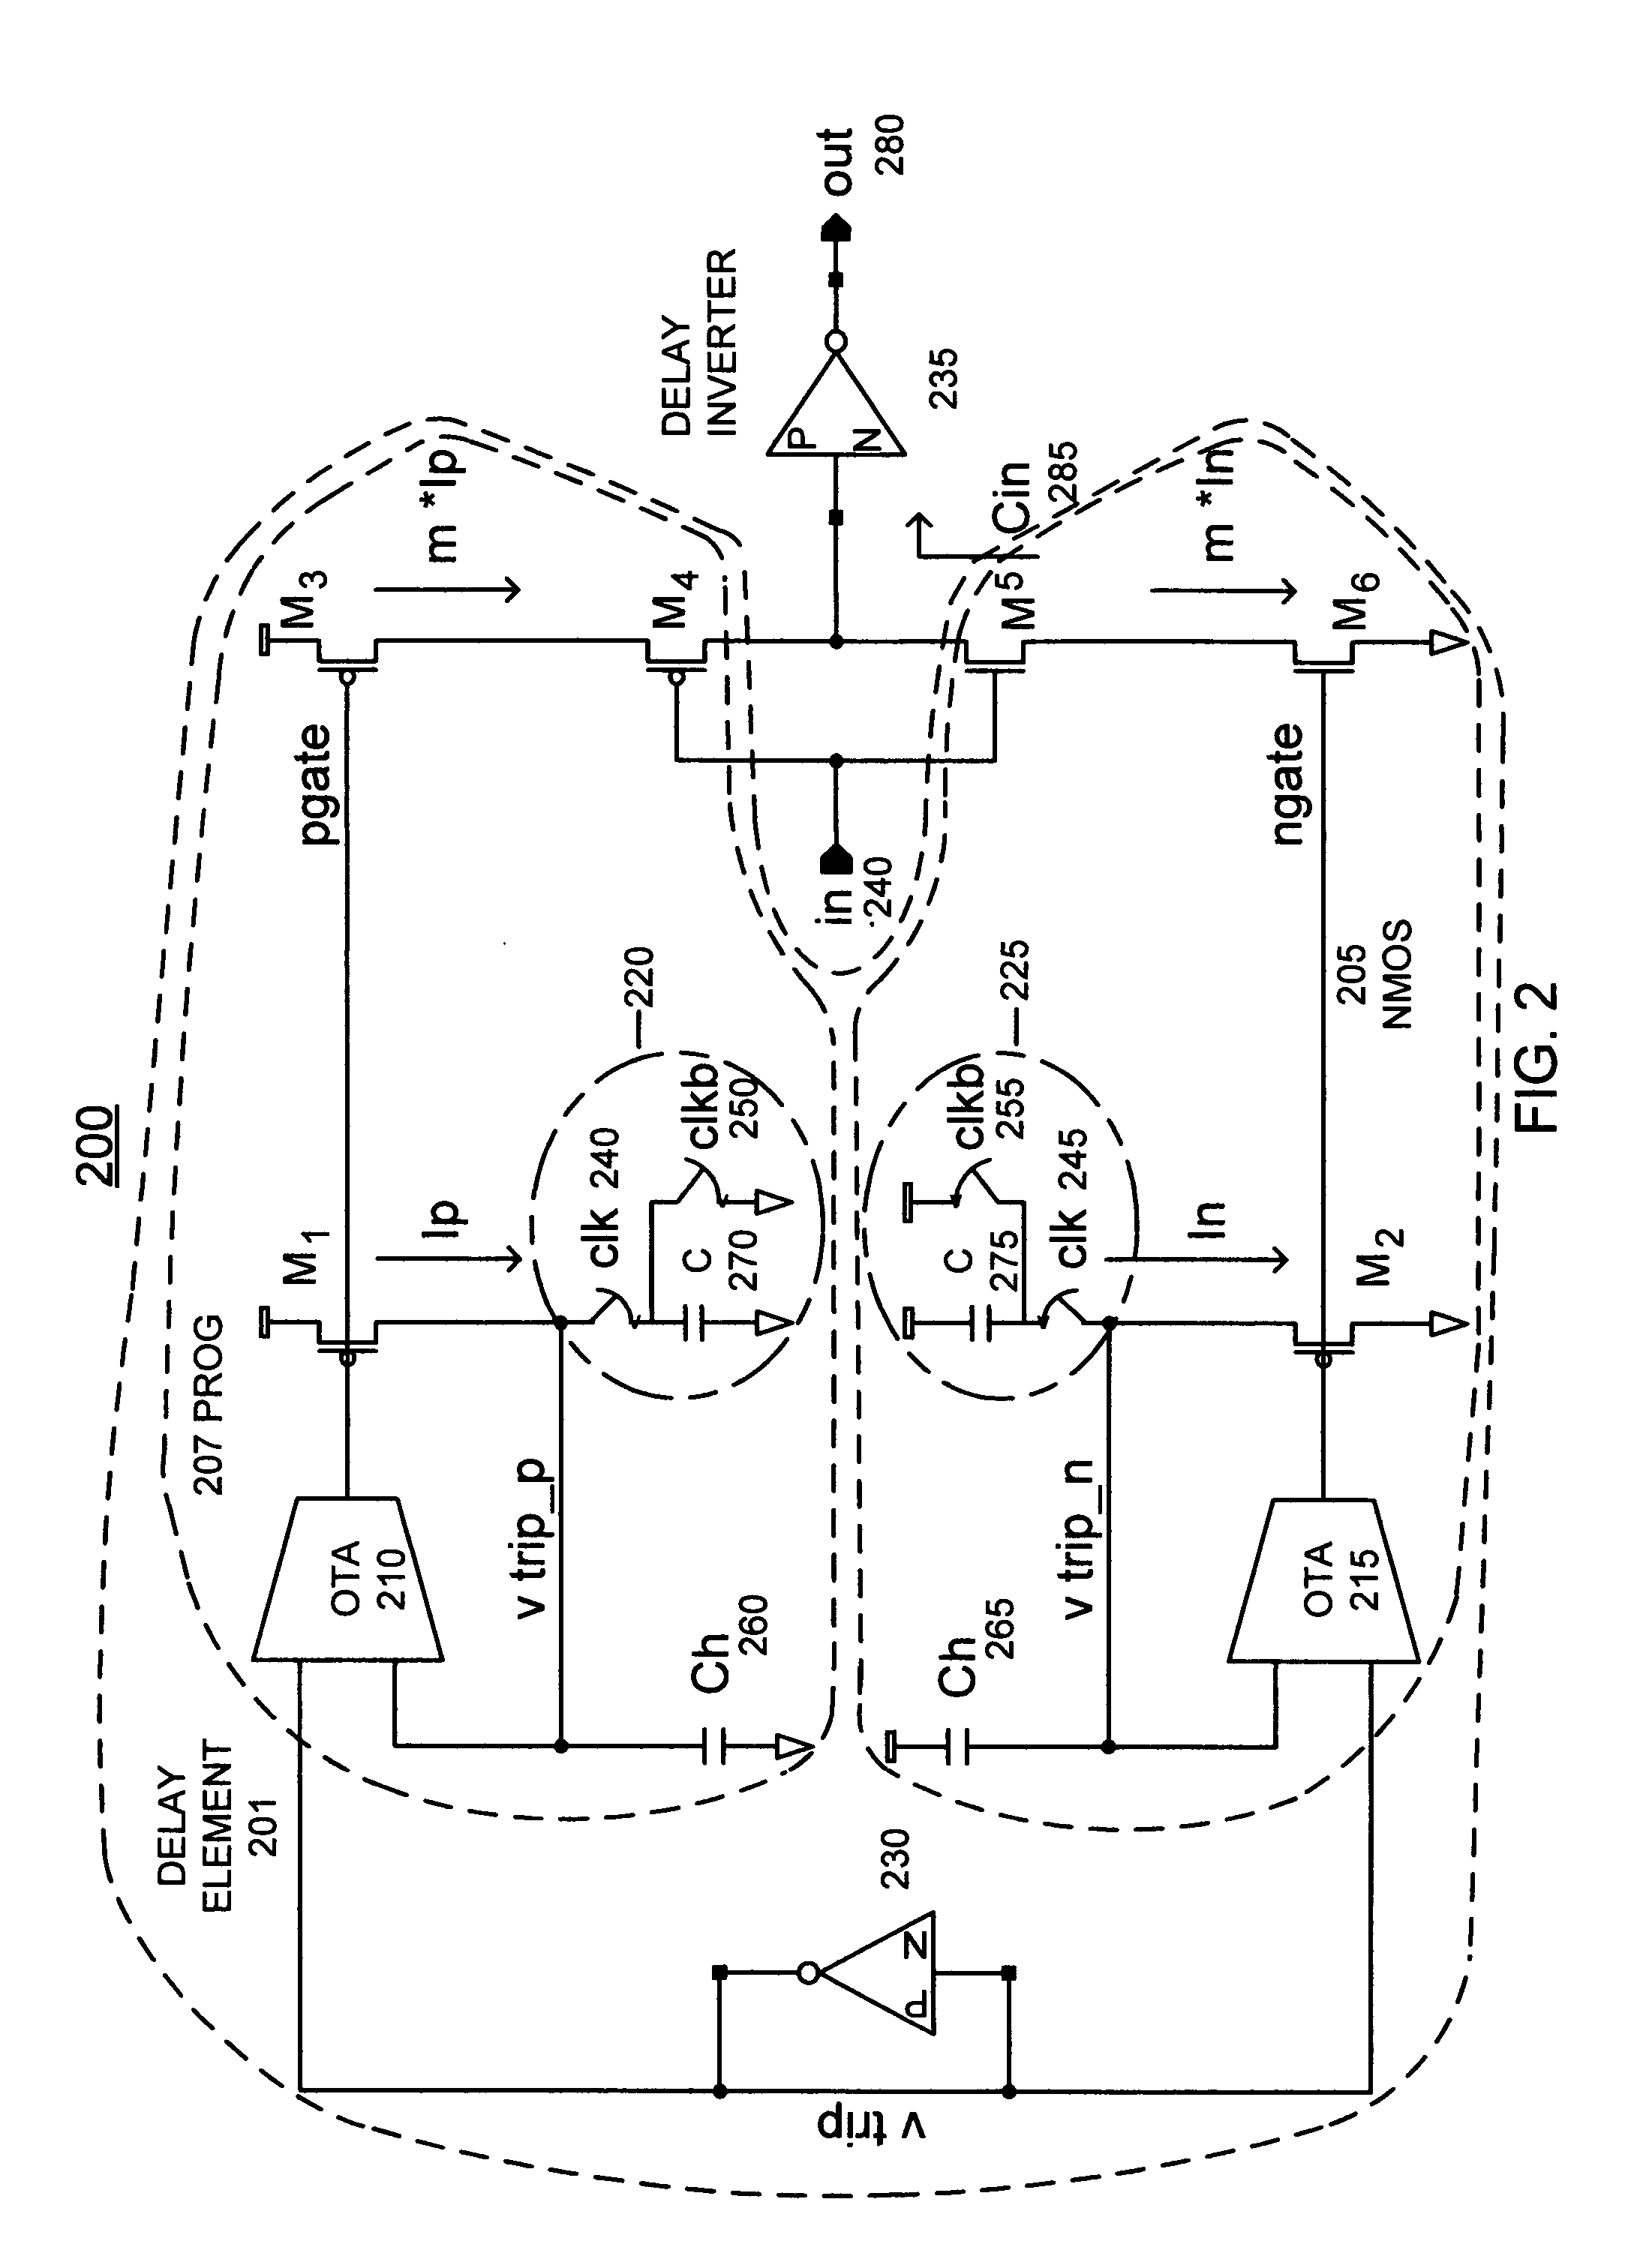 Delay circuit that scales with clock cycle time